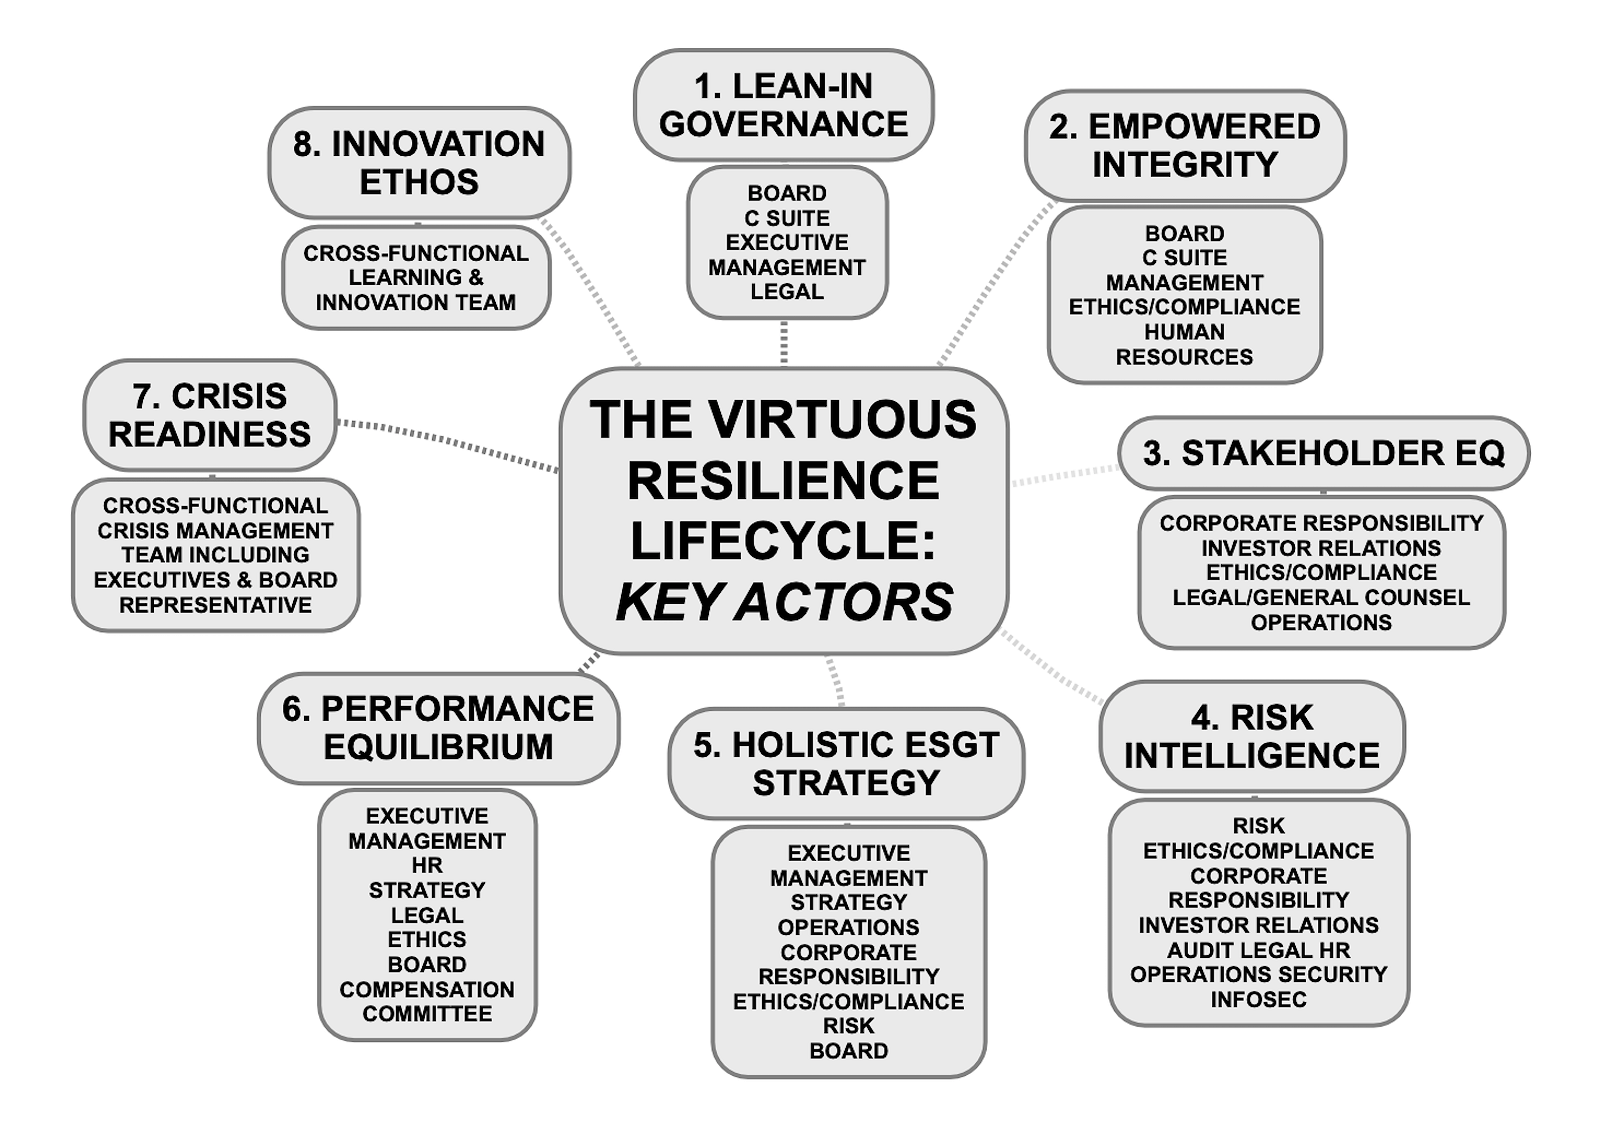 The virtuous resilience lifecycle